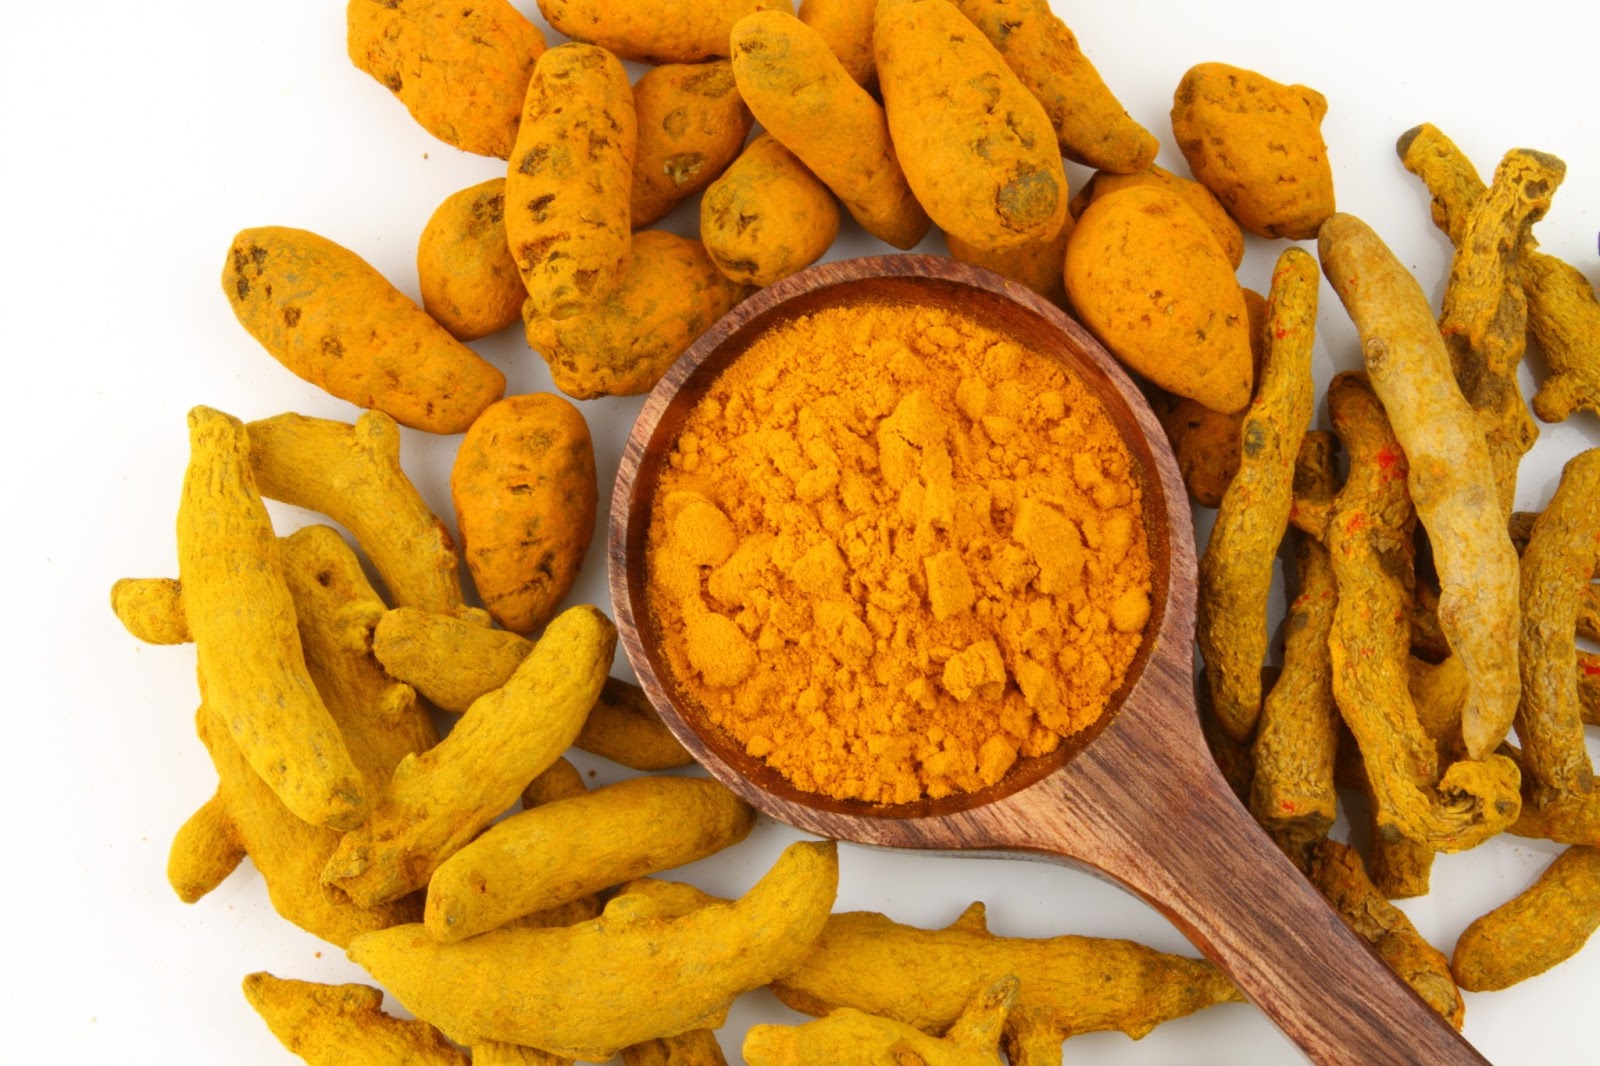 Curcumin Can Improve Osteoporosis and Bone Density Up To 7%